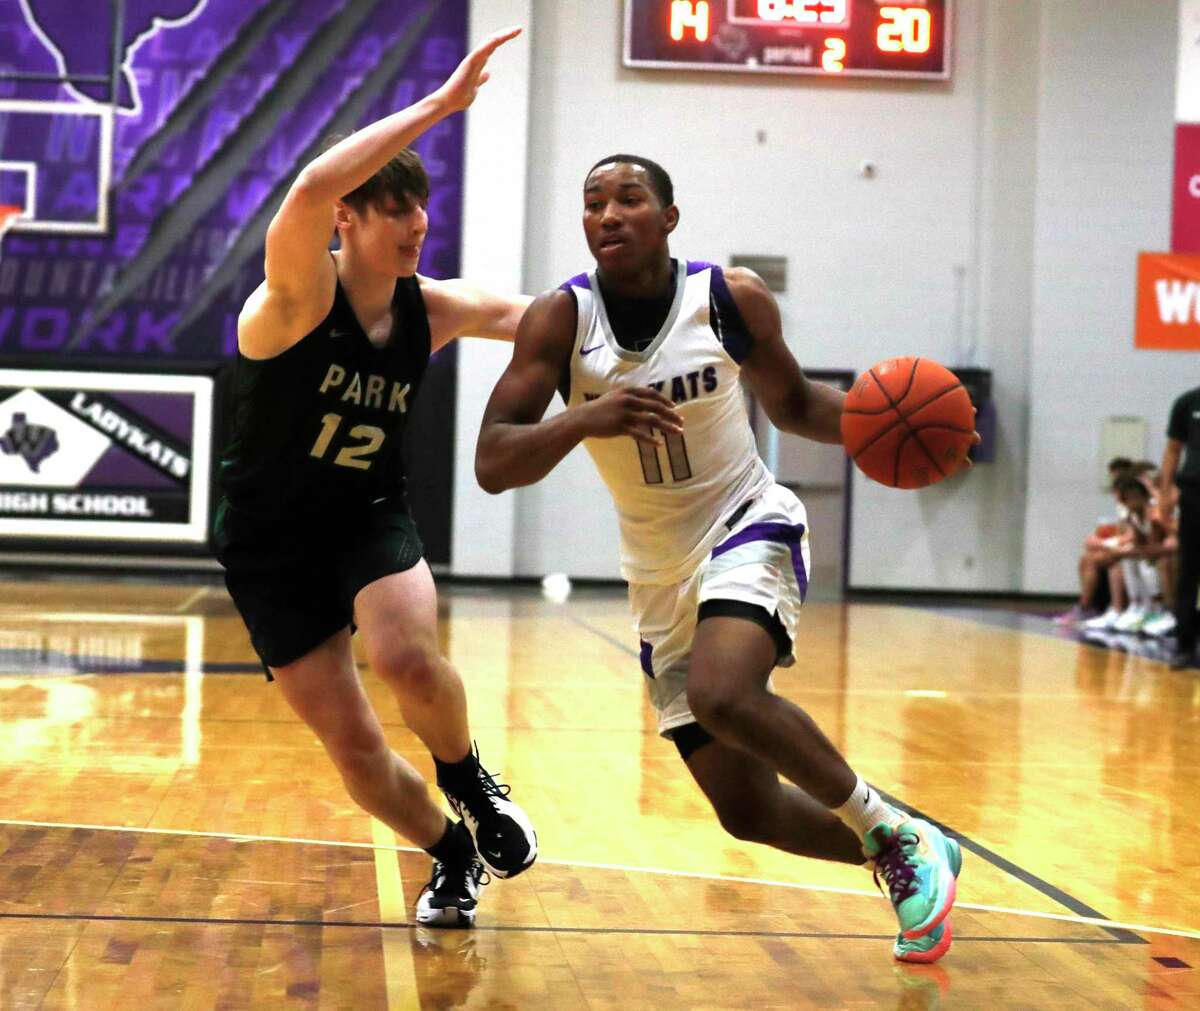 Willis guard Terrance Patterson (0) drives past Kingwood Park power forward Kyle Connelly (12) during the first quarter of a high school basketball game at Willis High School, Tuesday, Nov. 23, 2021, in Willis.